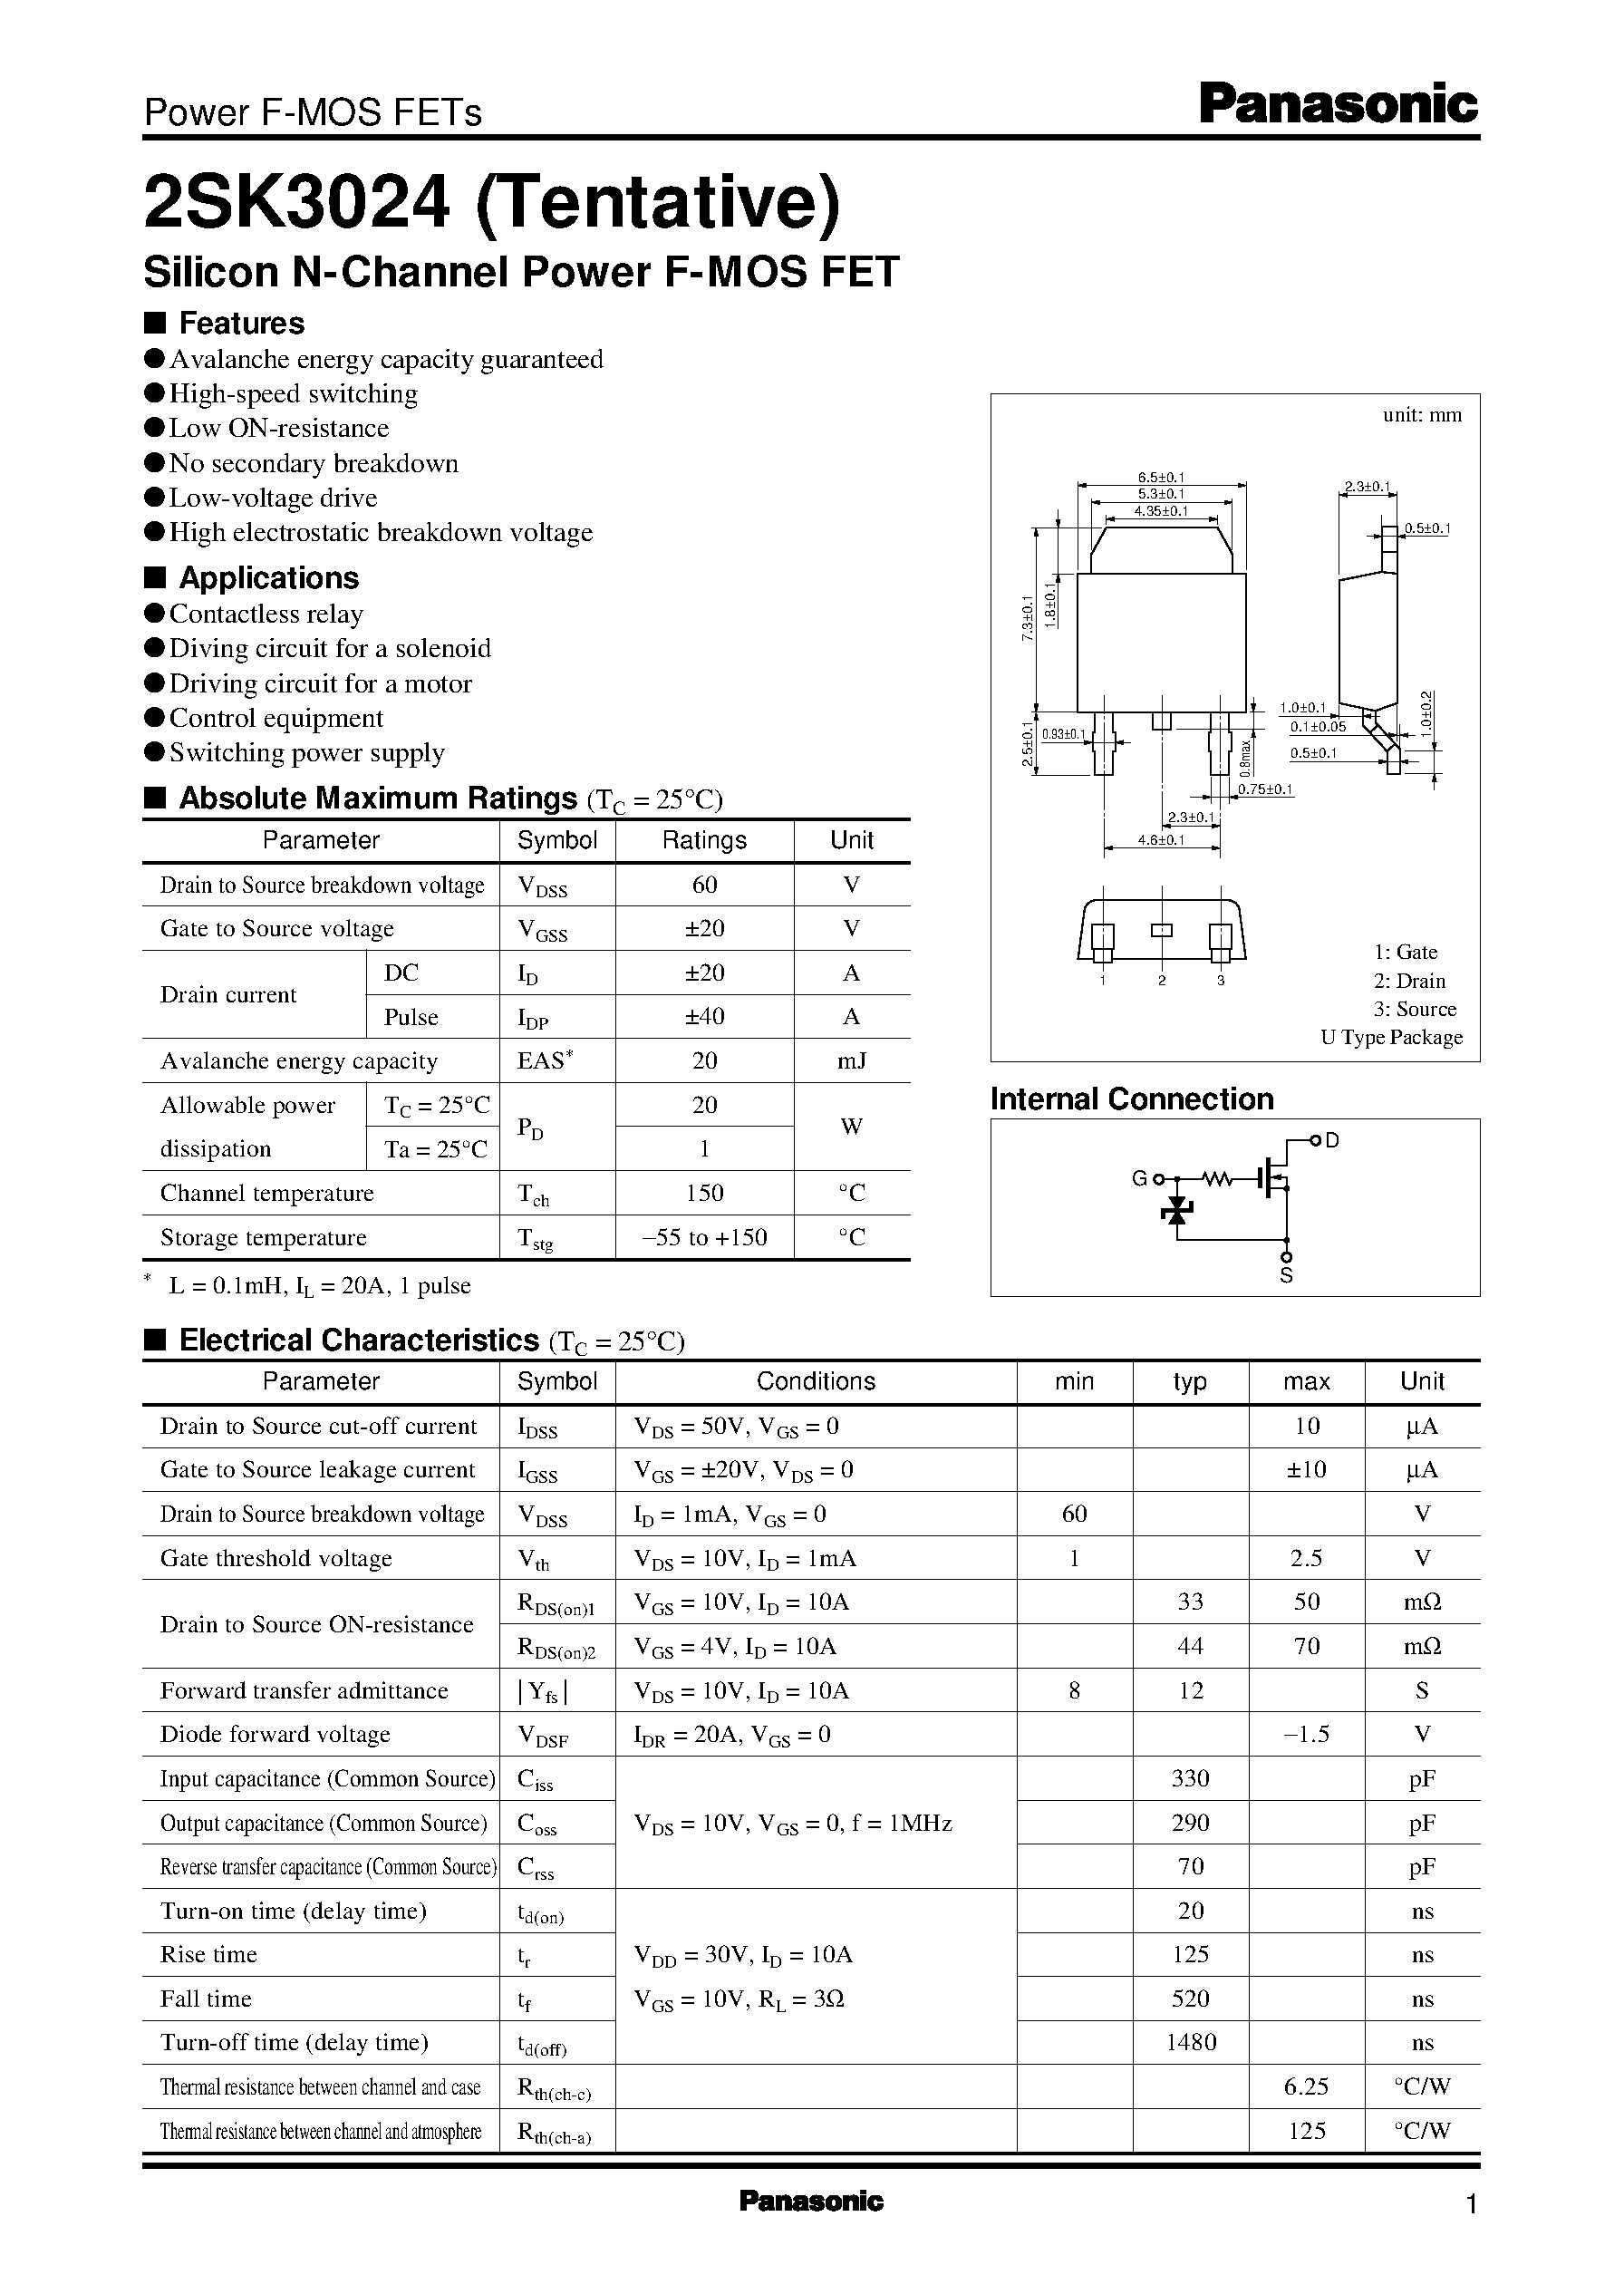 Datasheet 2SK3024 - Silicon N-Channel Power F-MOS FET page 1